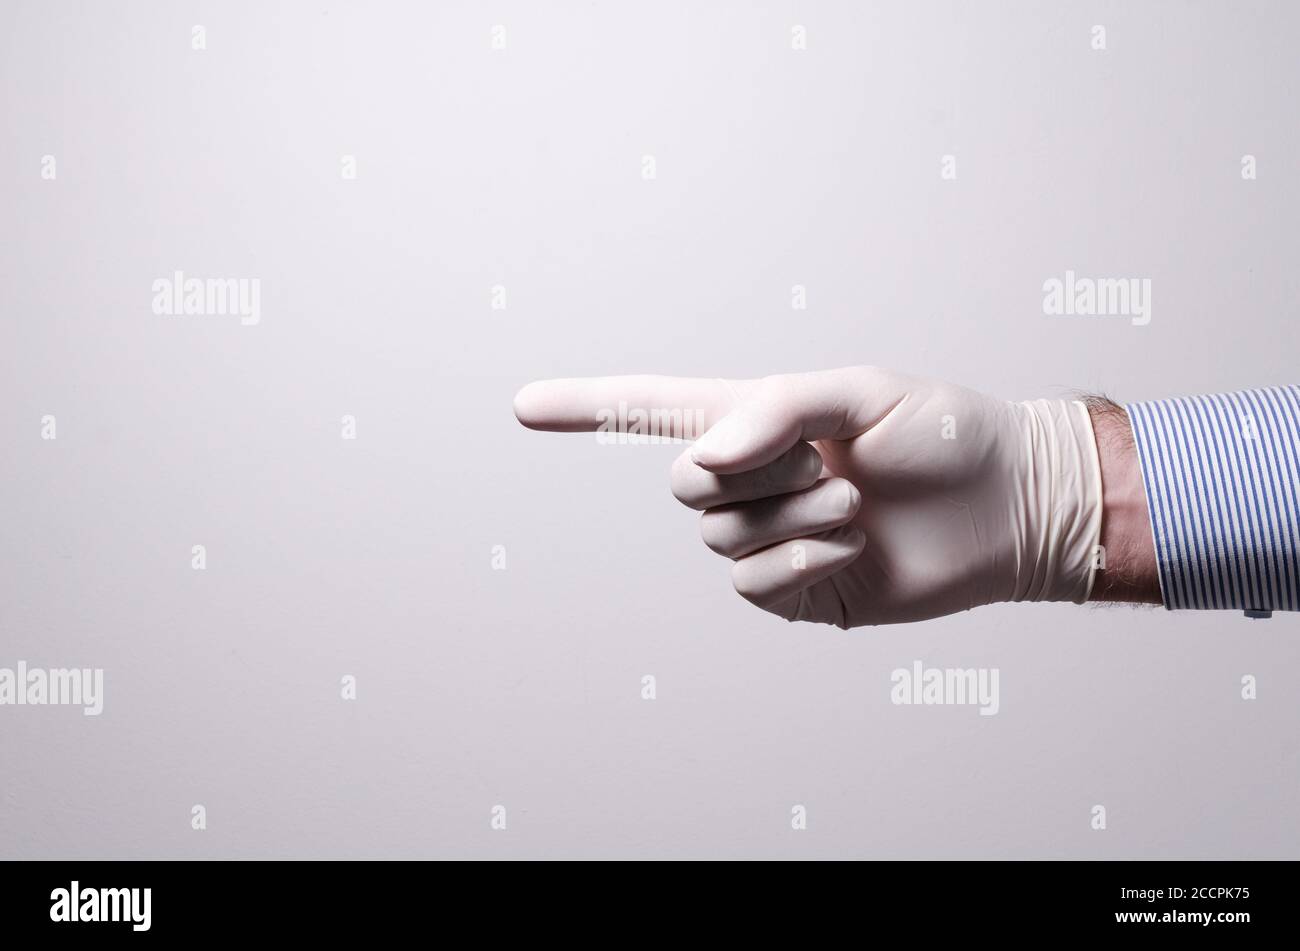 Male hand wearing rubber protective glove, pointing finger, against white background, indoors, studio Stock Photo